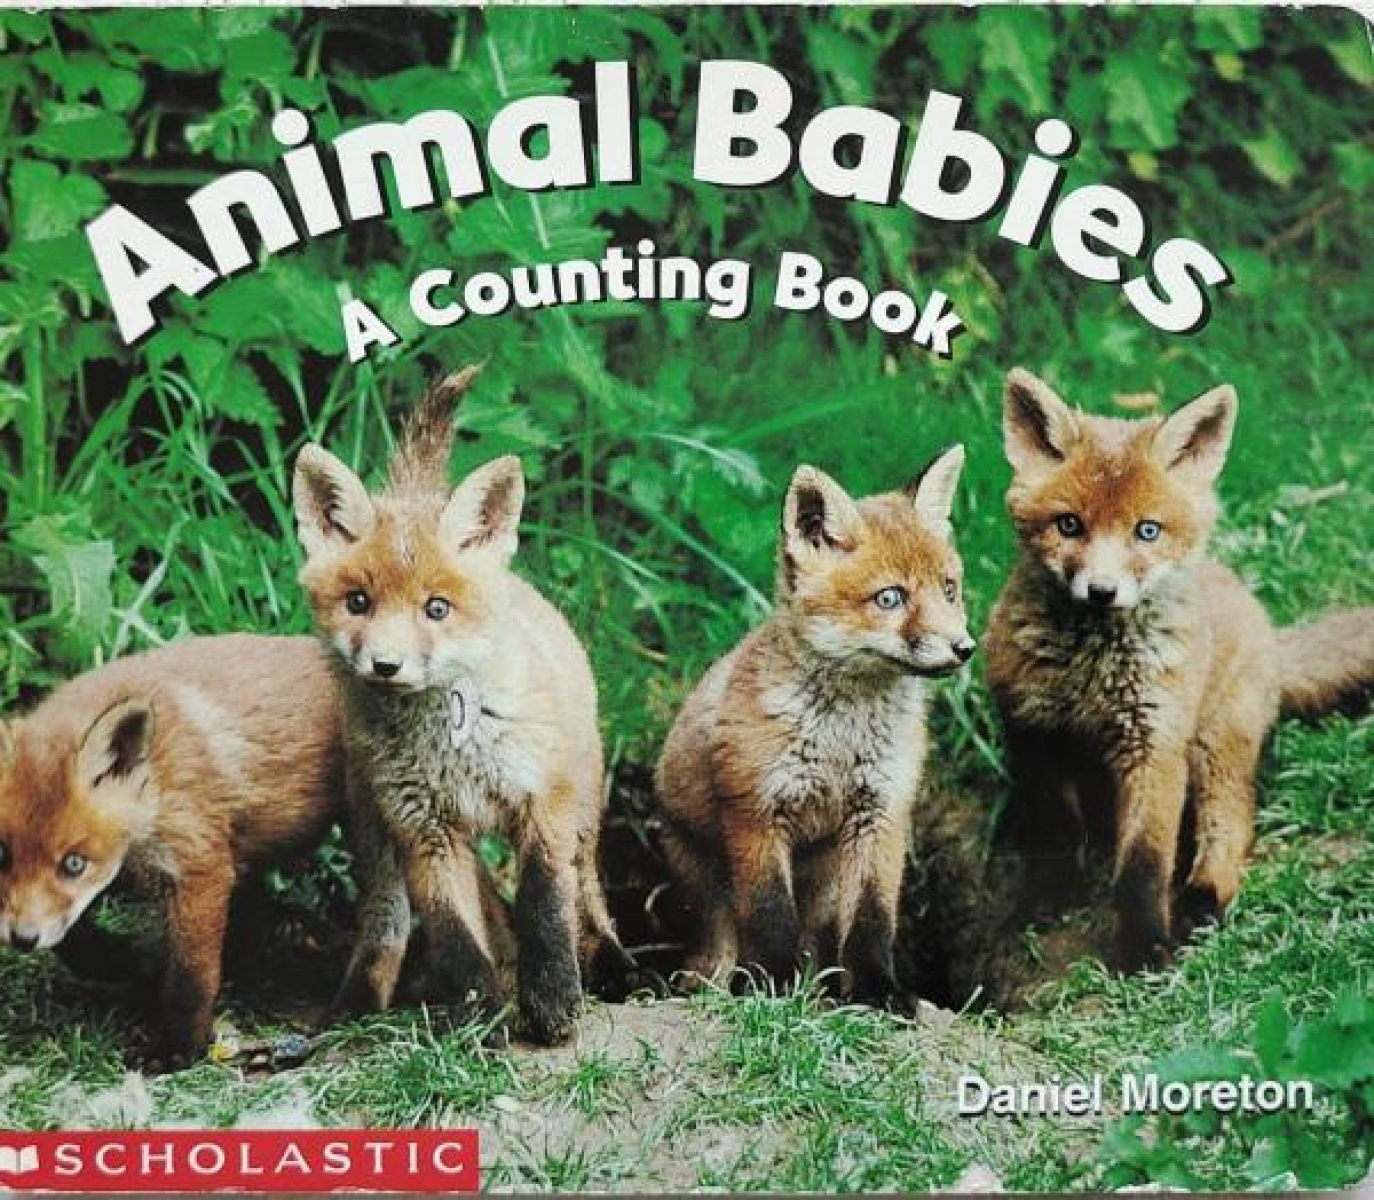    Animal Babies: Counting Book 